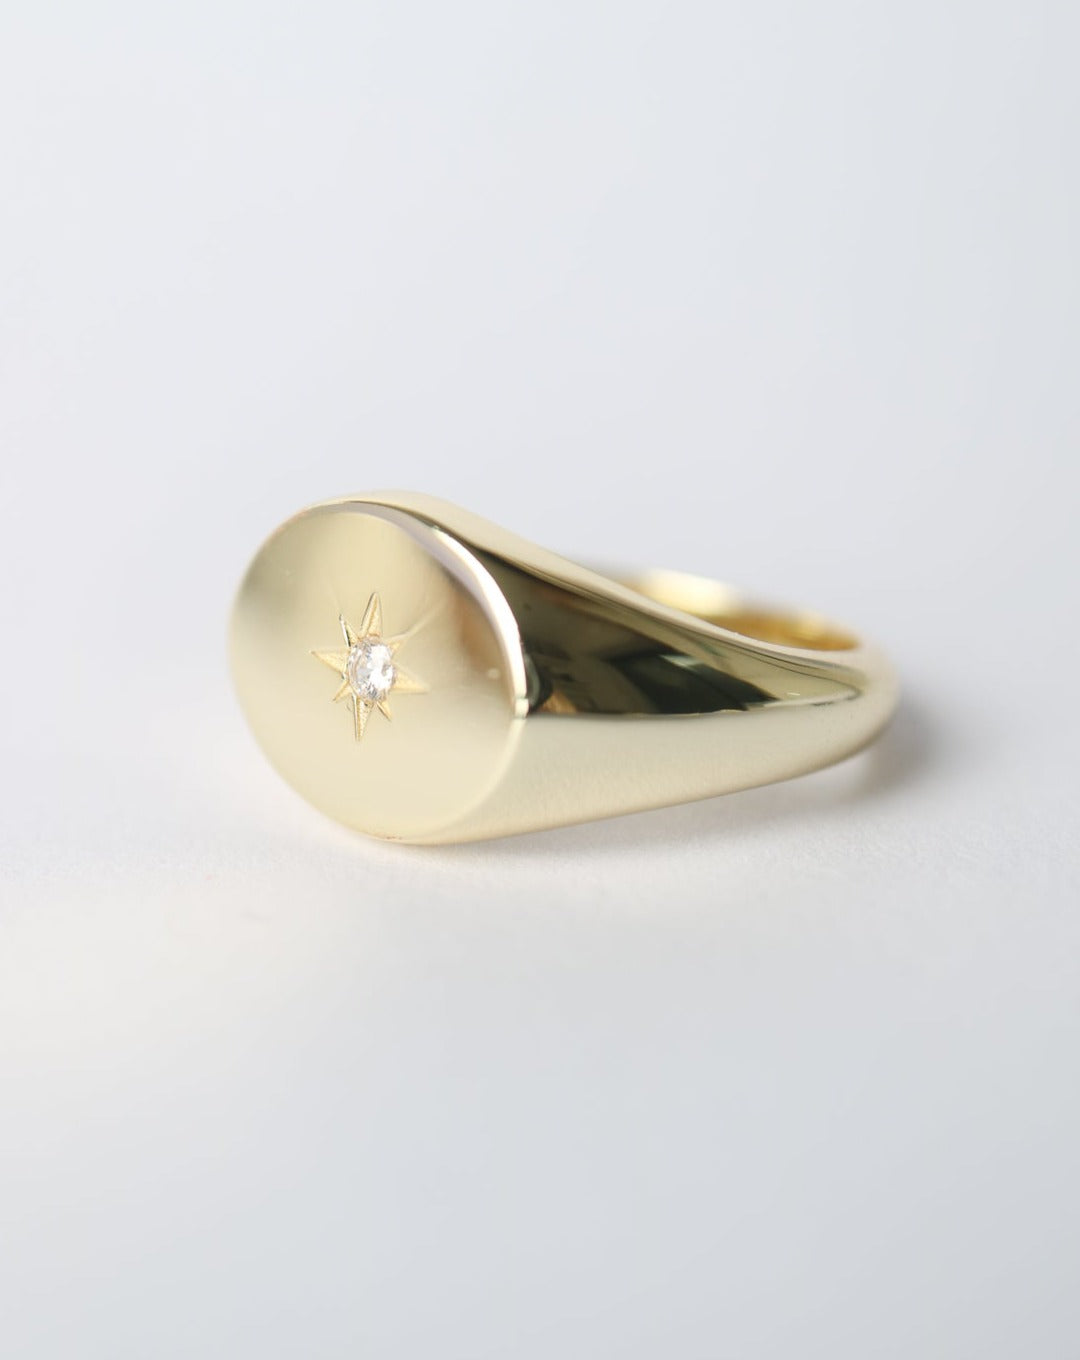 Star Signet Ring from Kini Jewels